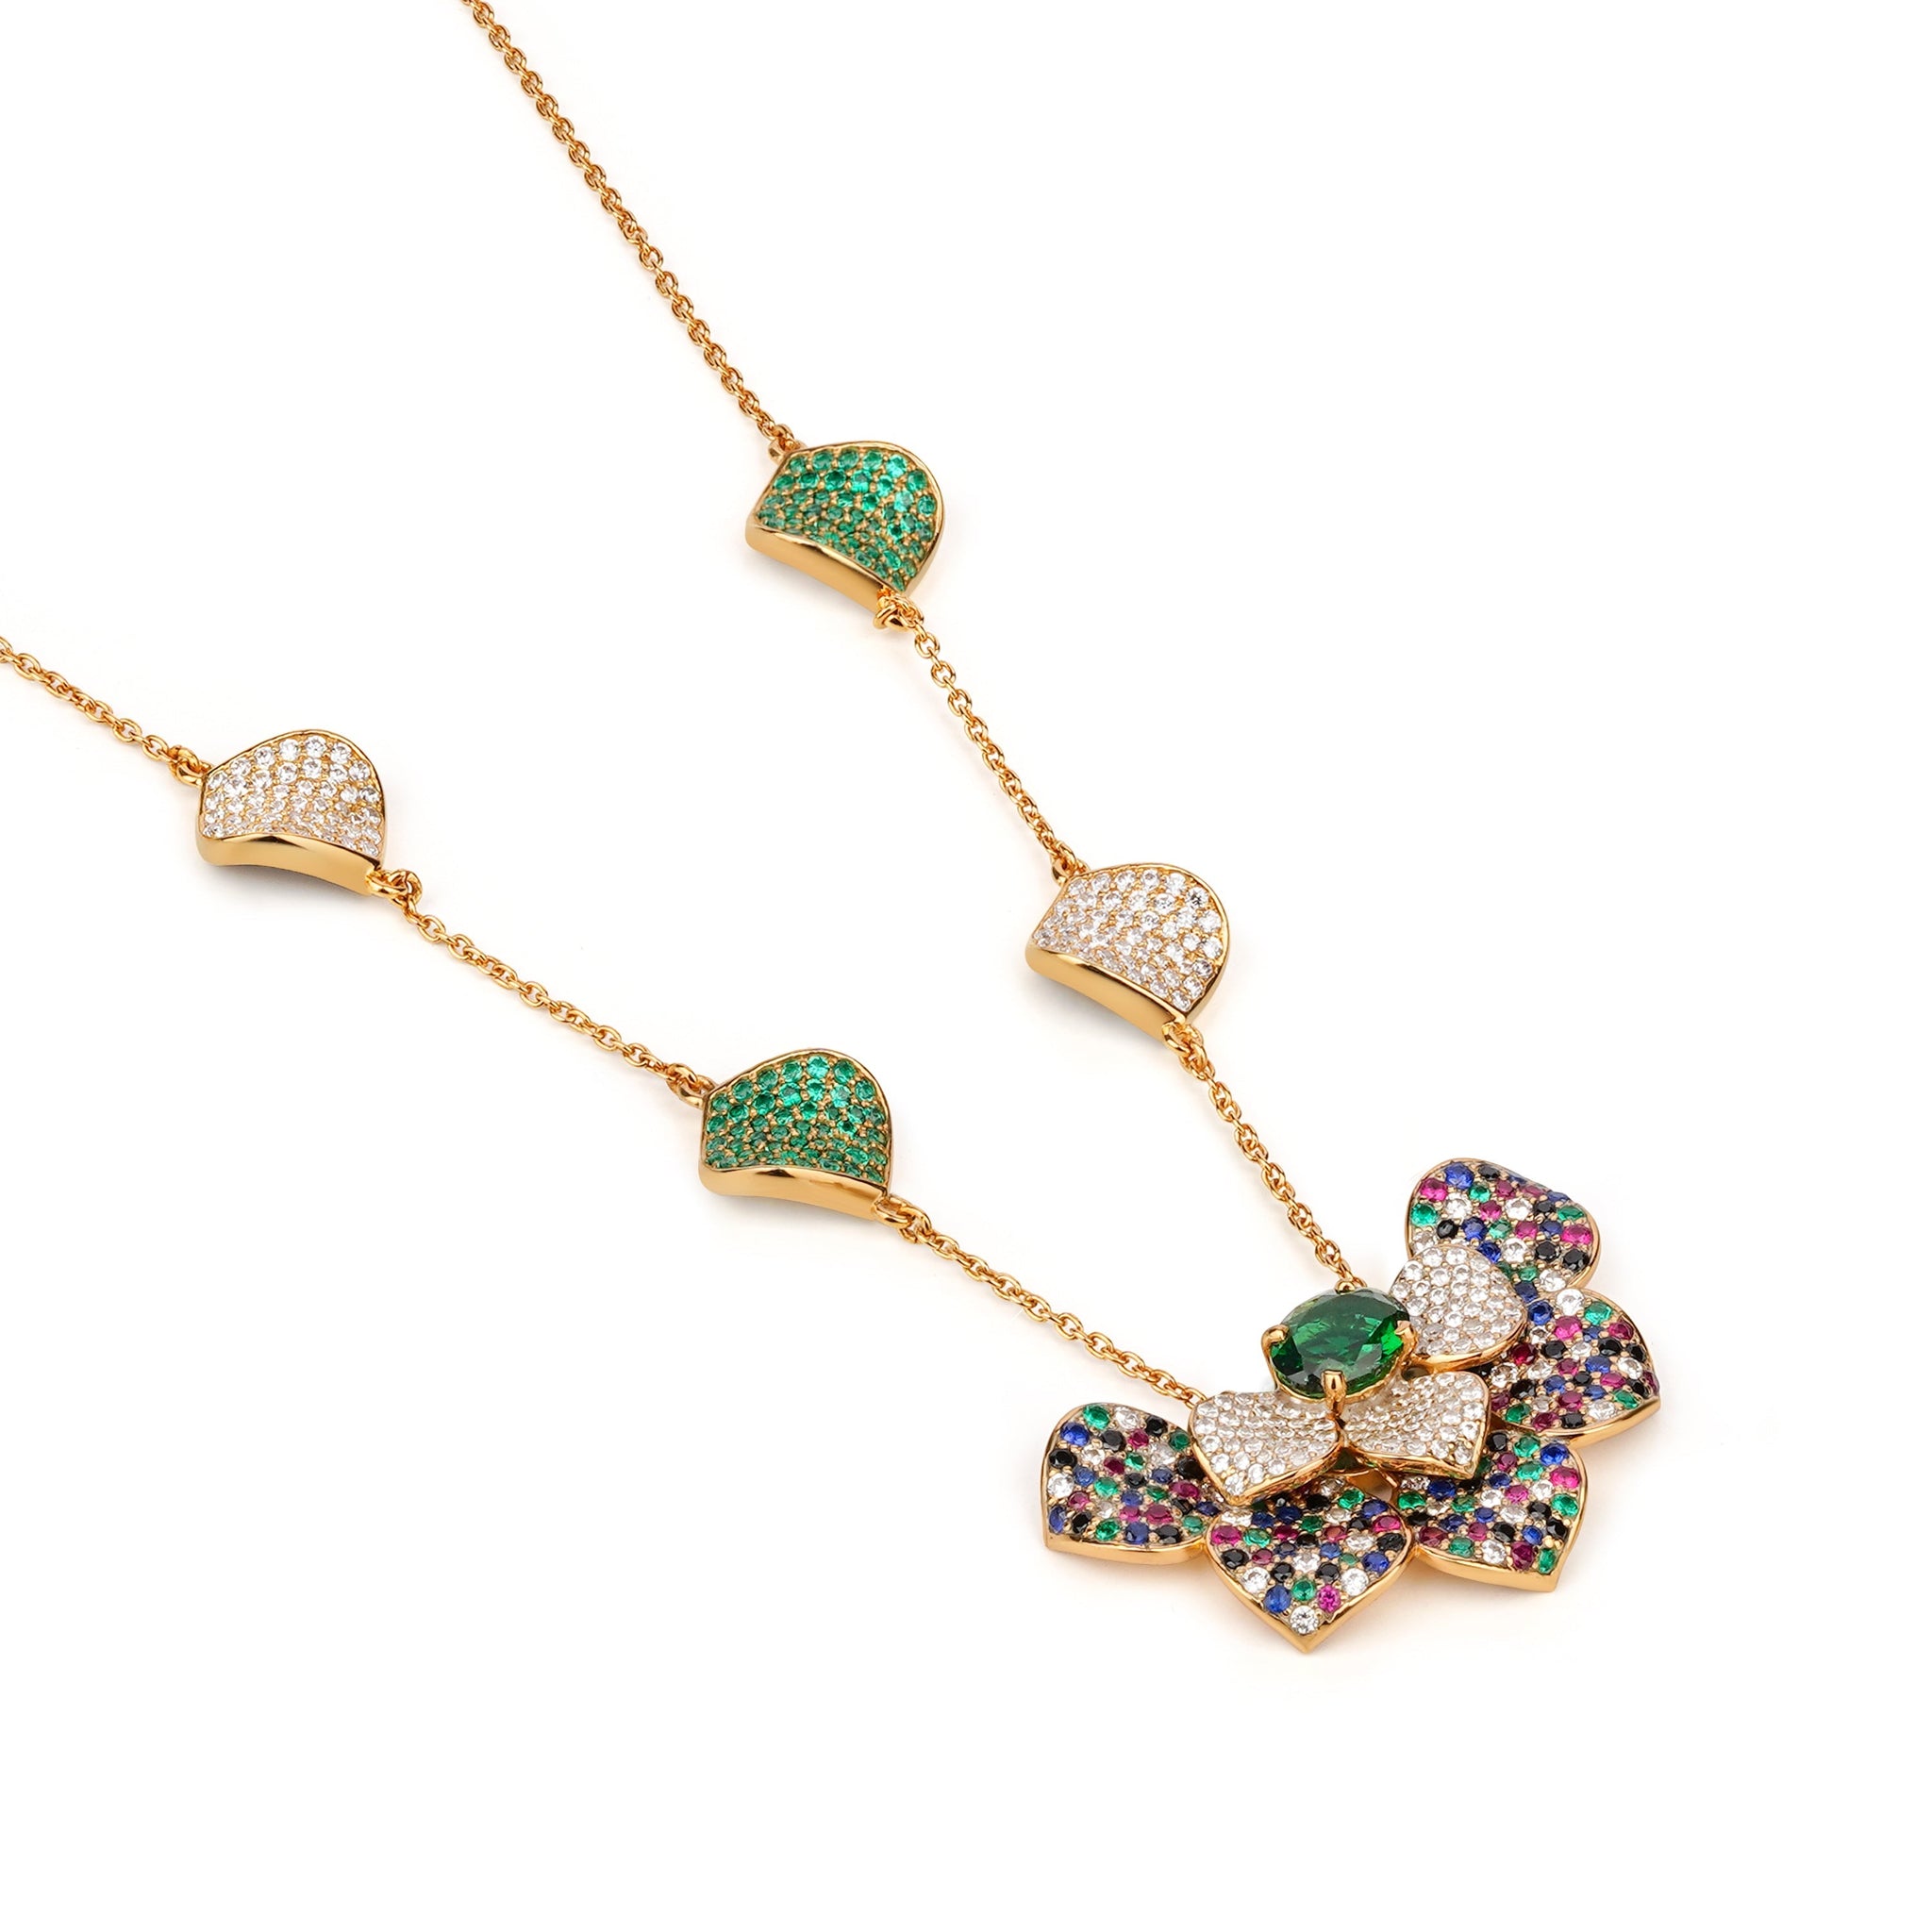 Glorious Petal Necklace - Green and Gold